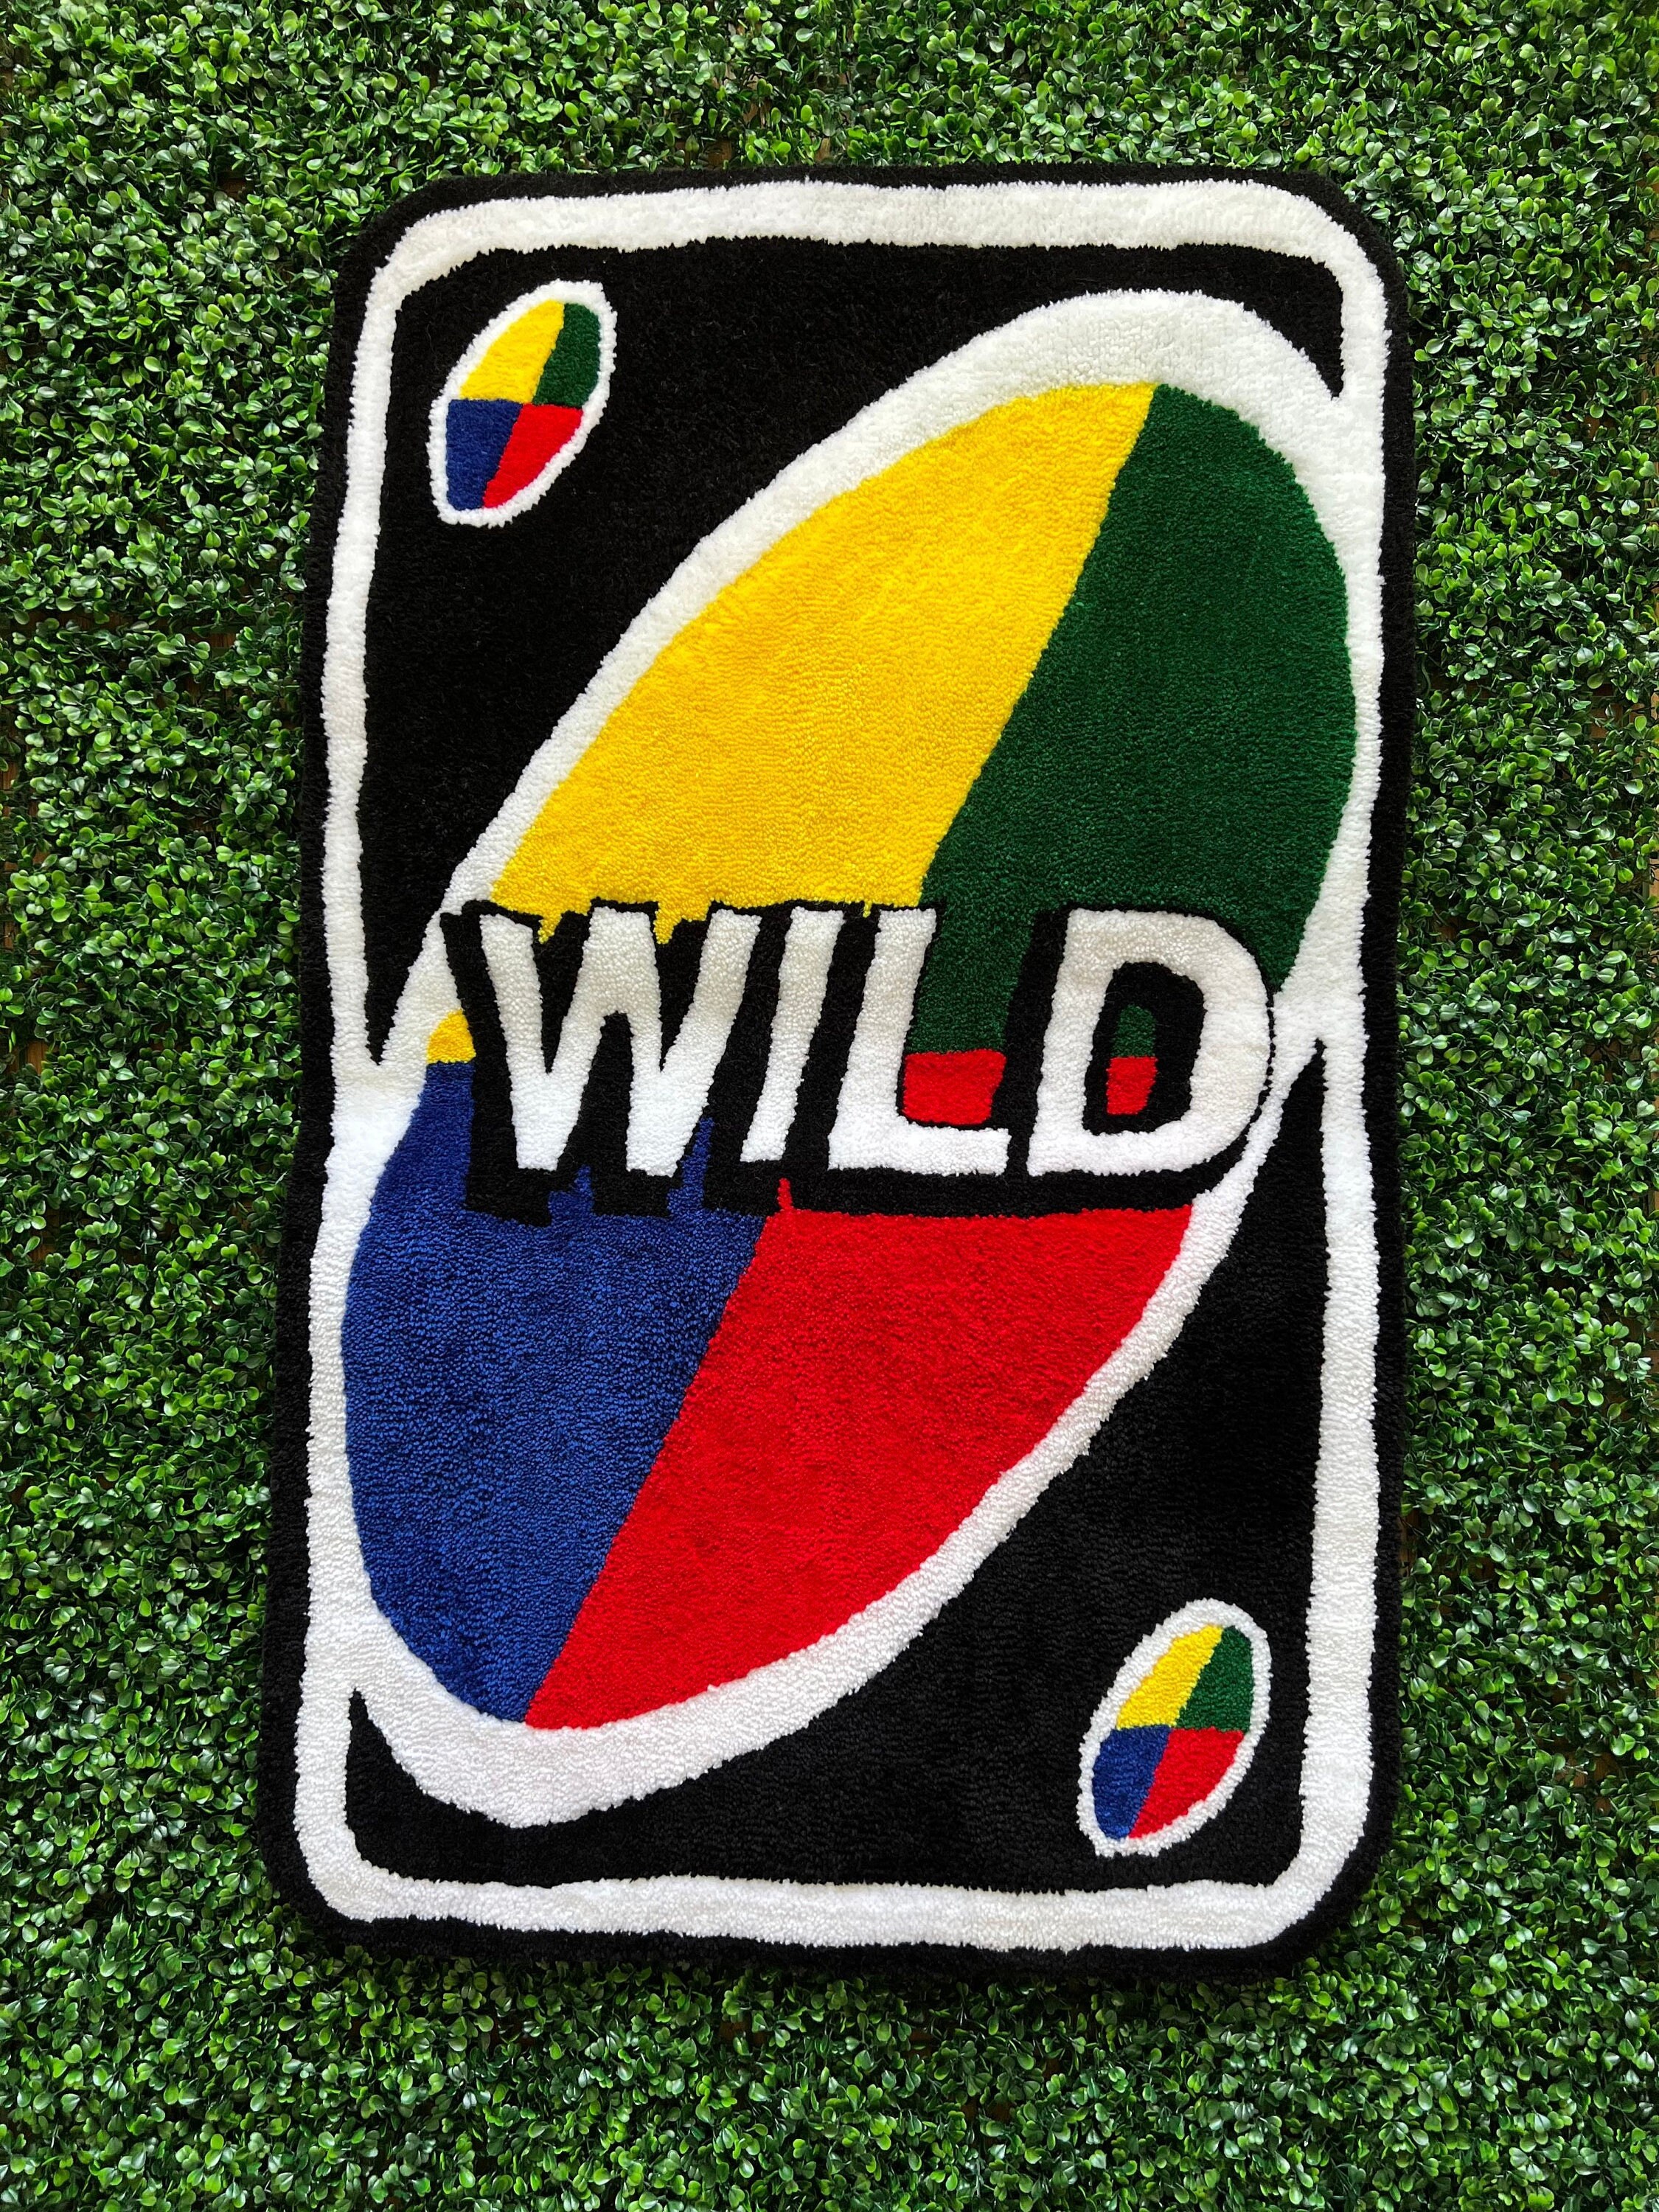  INTIMO UNO Card Game Wild Card Super Soft and Cuddly